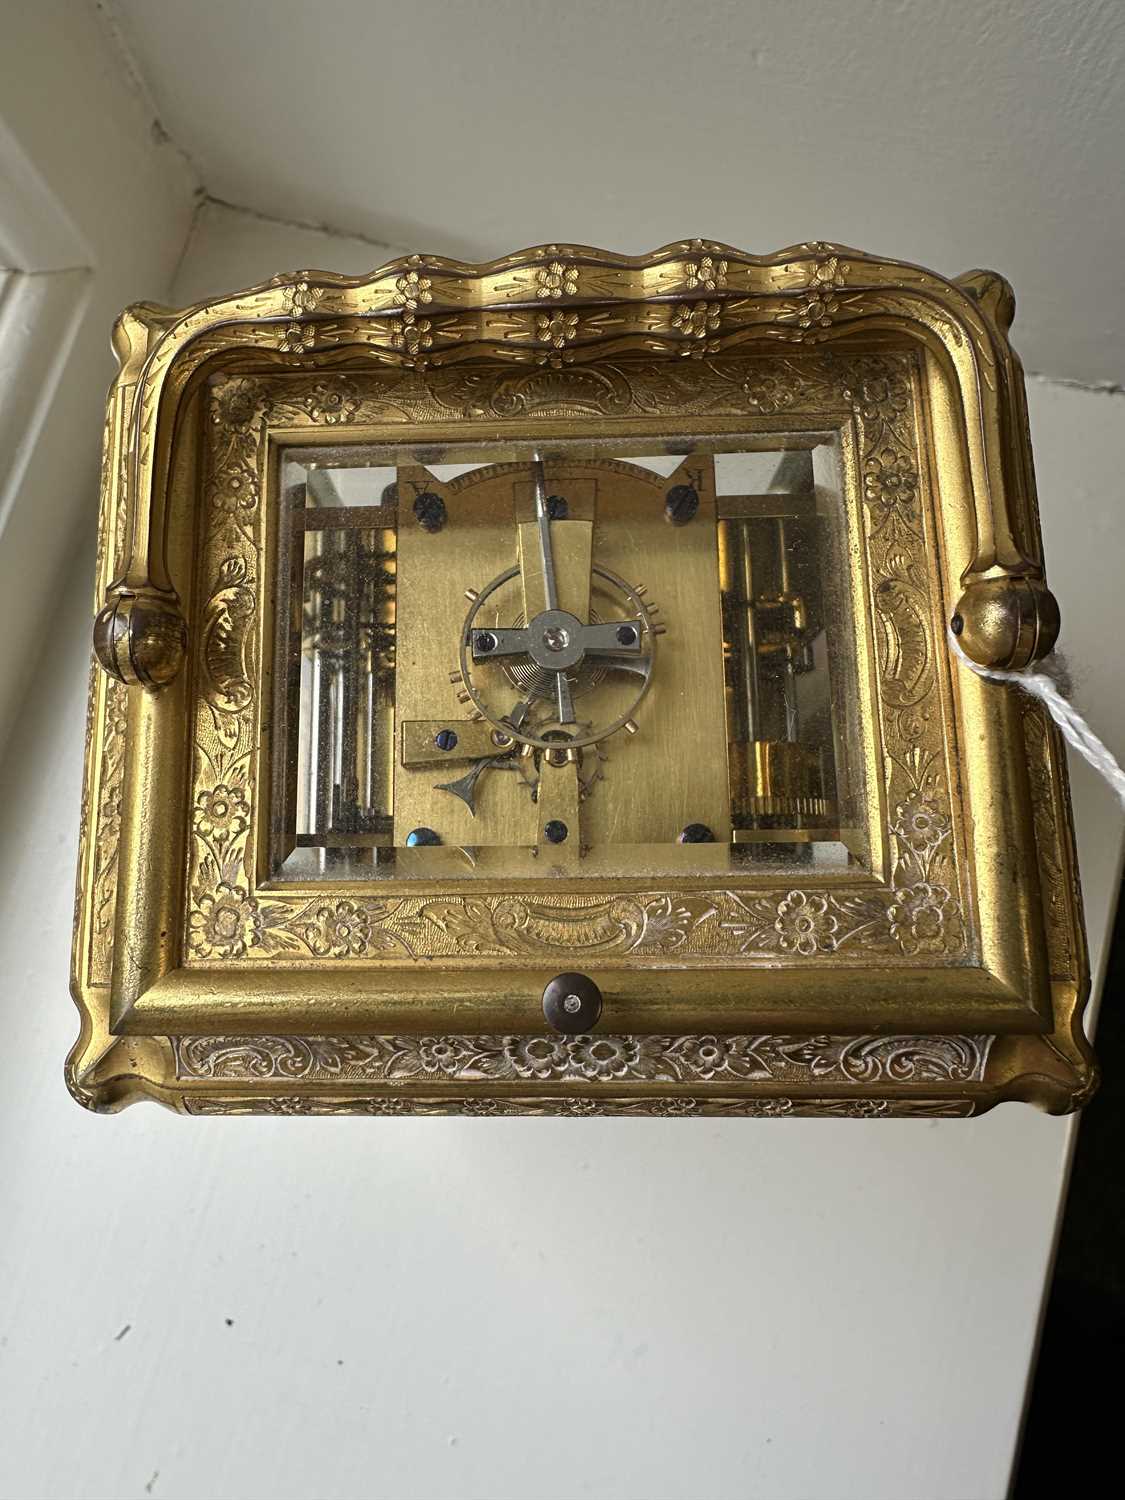 HENRI JACOT, PARIS. A LATE 19TH CENTURY FRENCH GRAND SONNERIE CARRIAGE CLOCK - Image 18 of 20